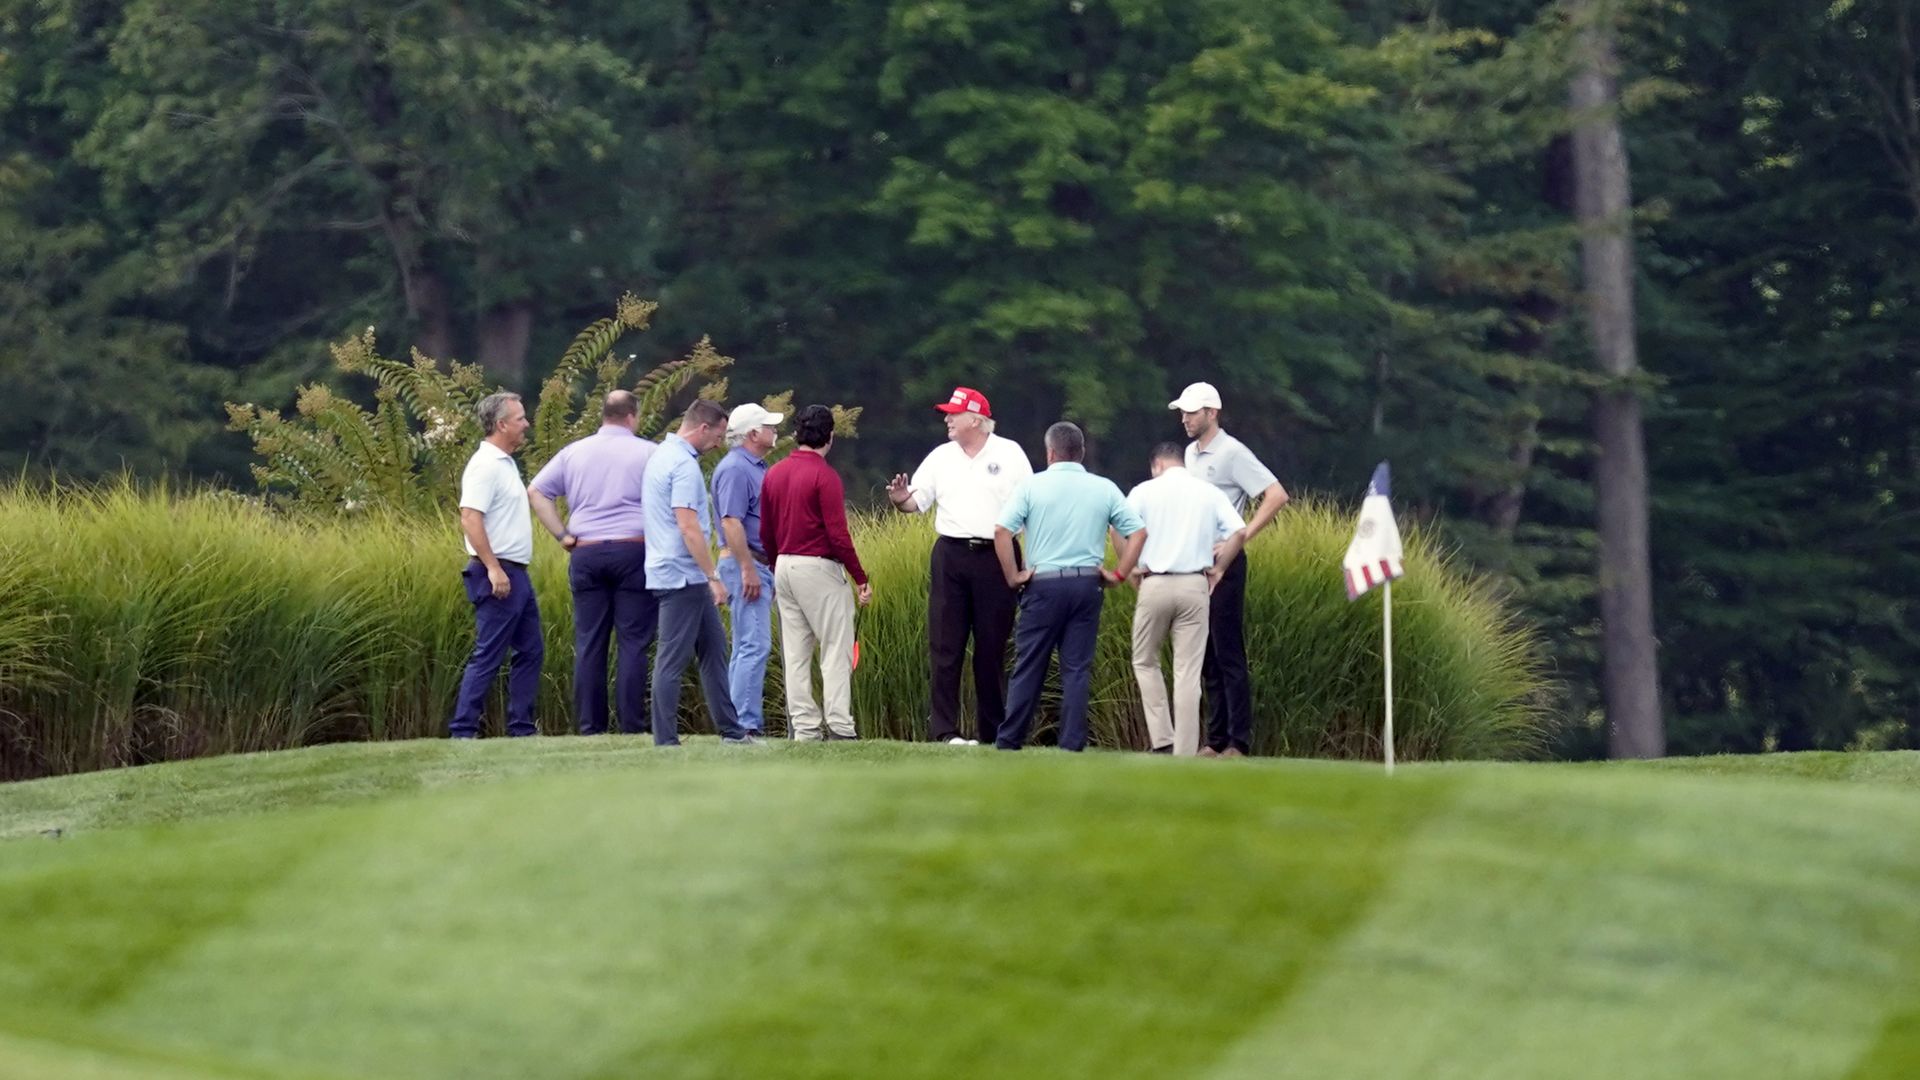 Trump at his Sterling, Virginia golf course